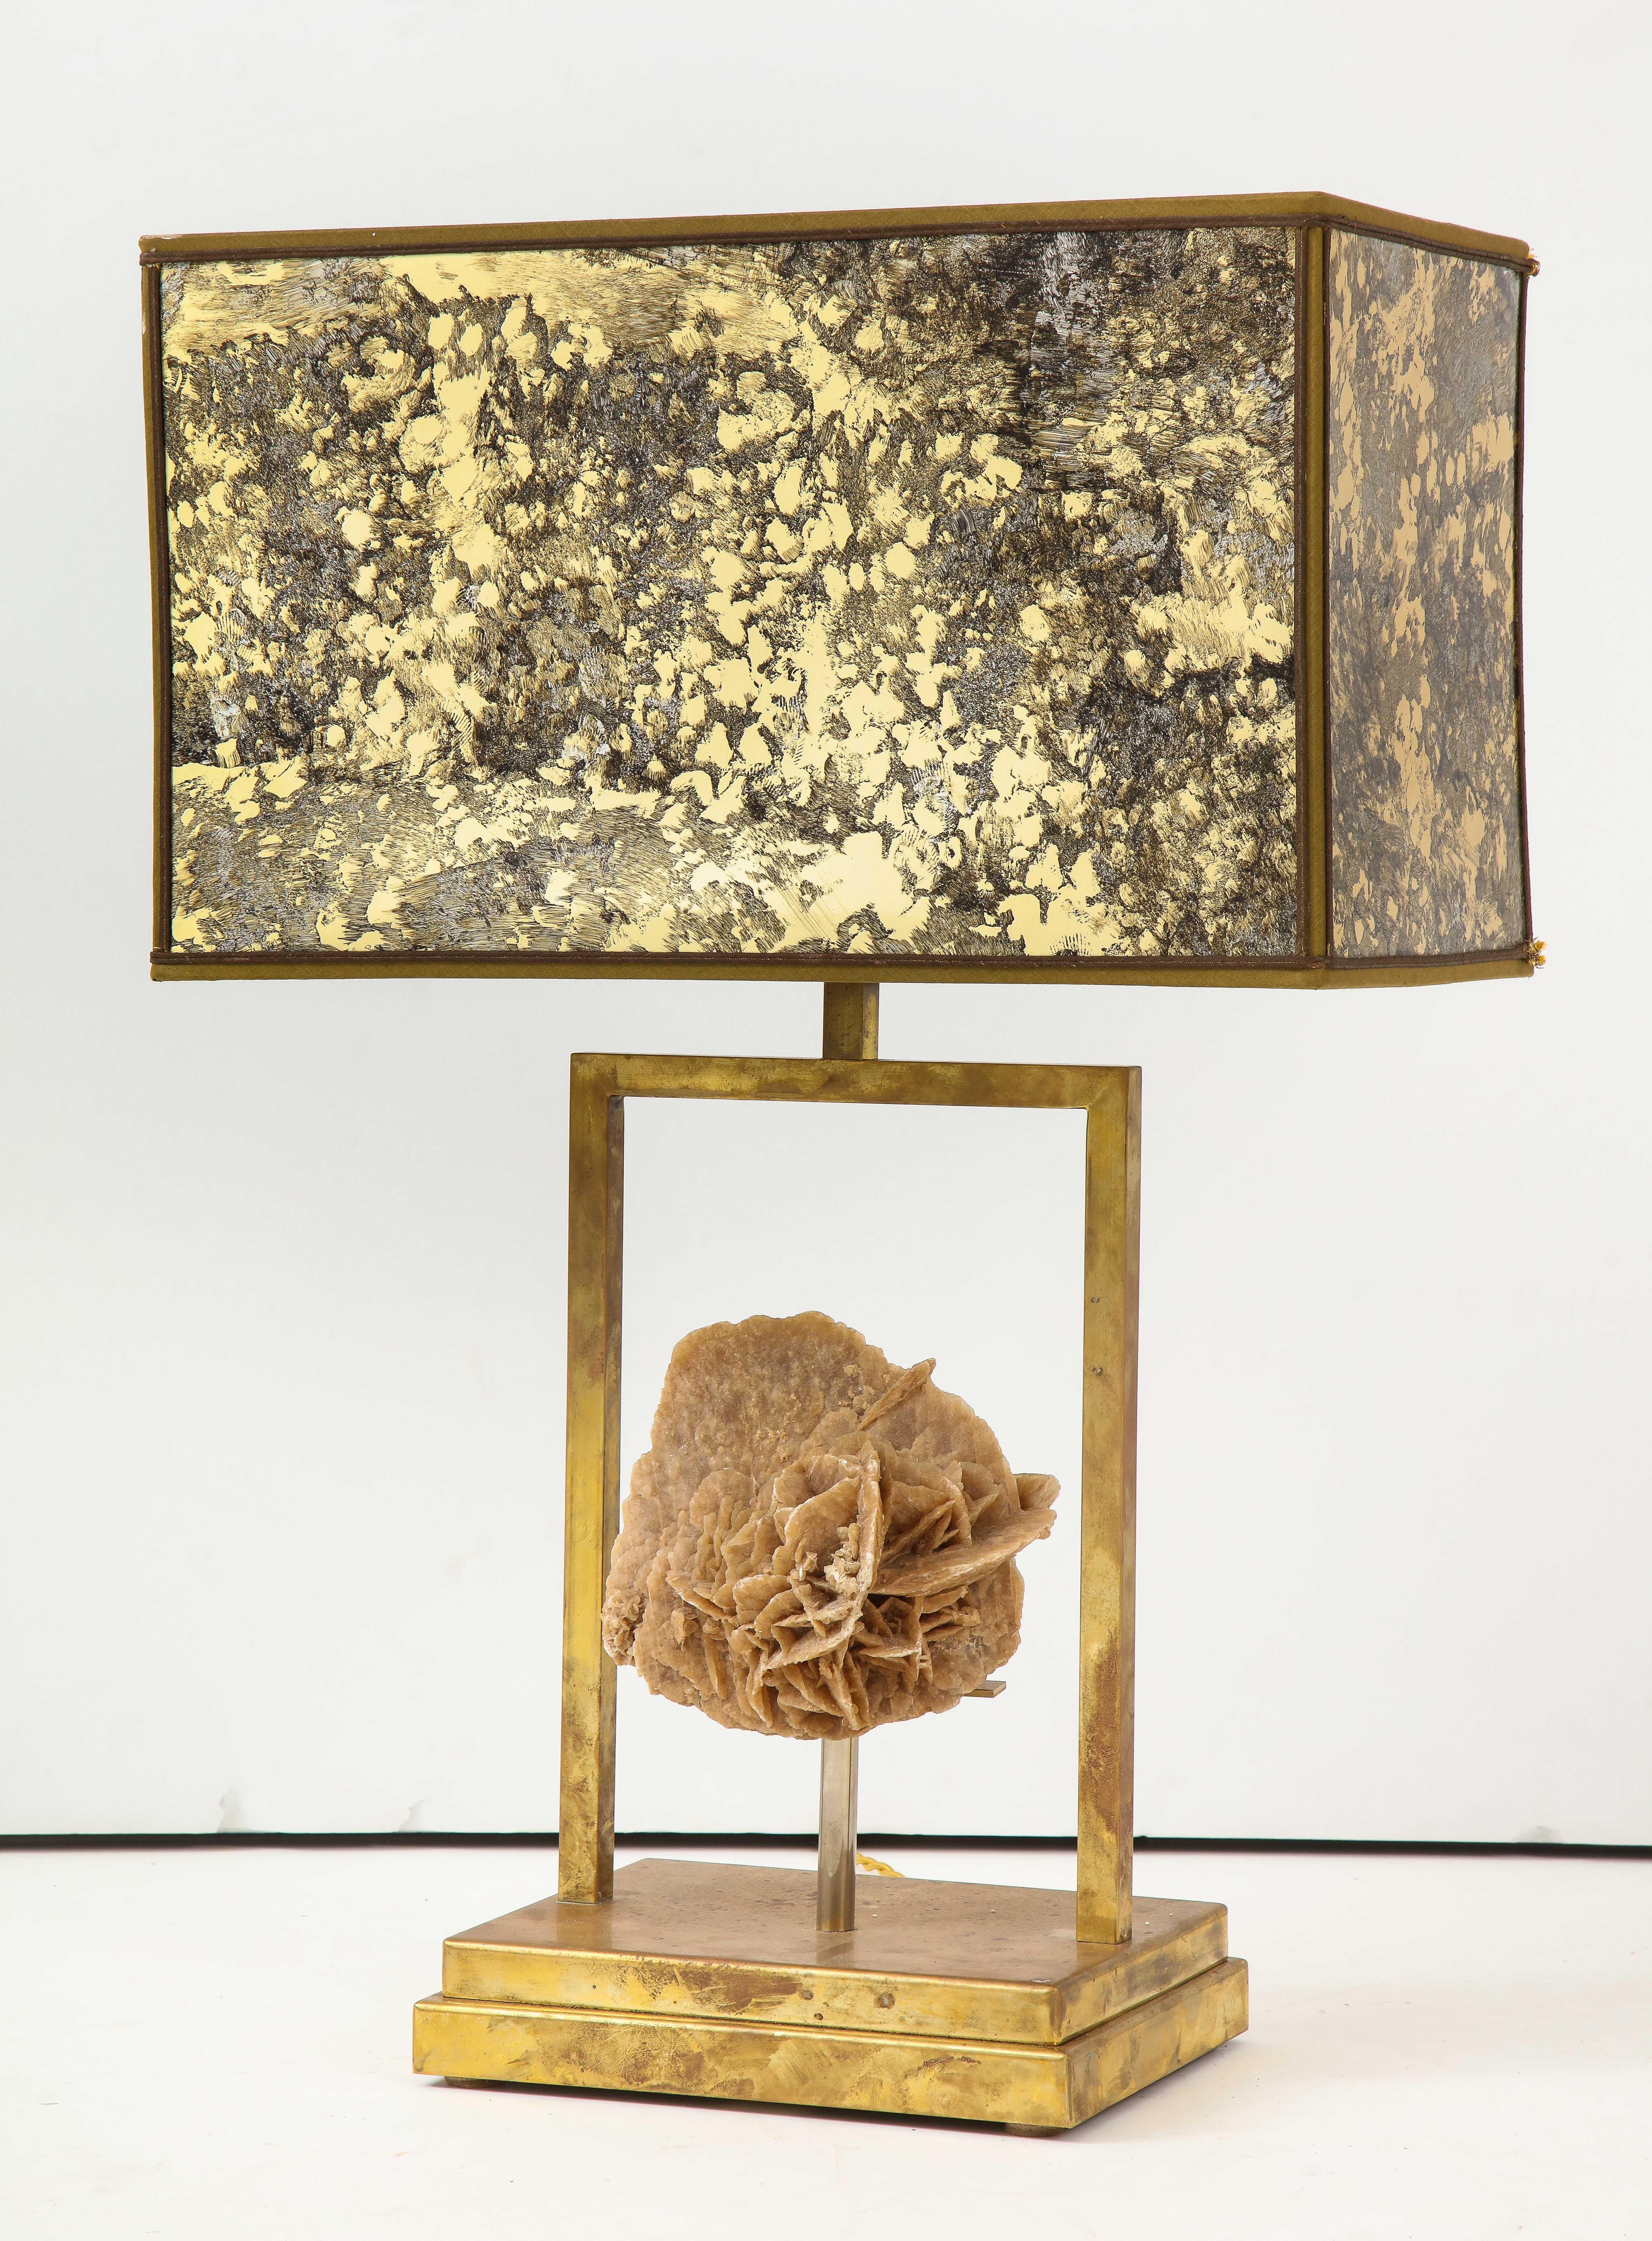 Gorgeous table lamp with organic desert rose gypsum mineral mounted on a minimal brass base. Topped by a metal, rectangular lamp shade with interesting oxidation throughout. A bright accent that adds texture and warmth to any space. Rewired for